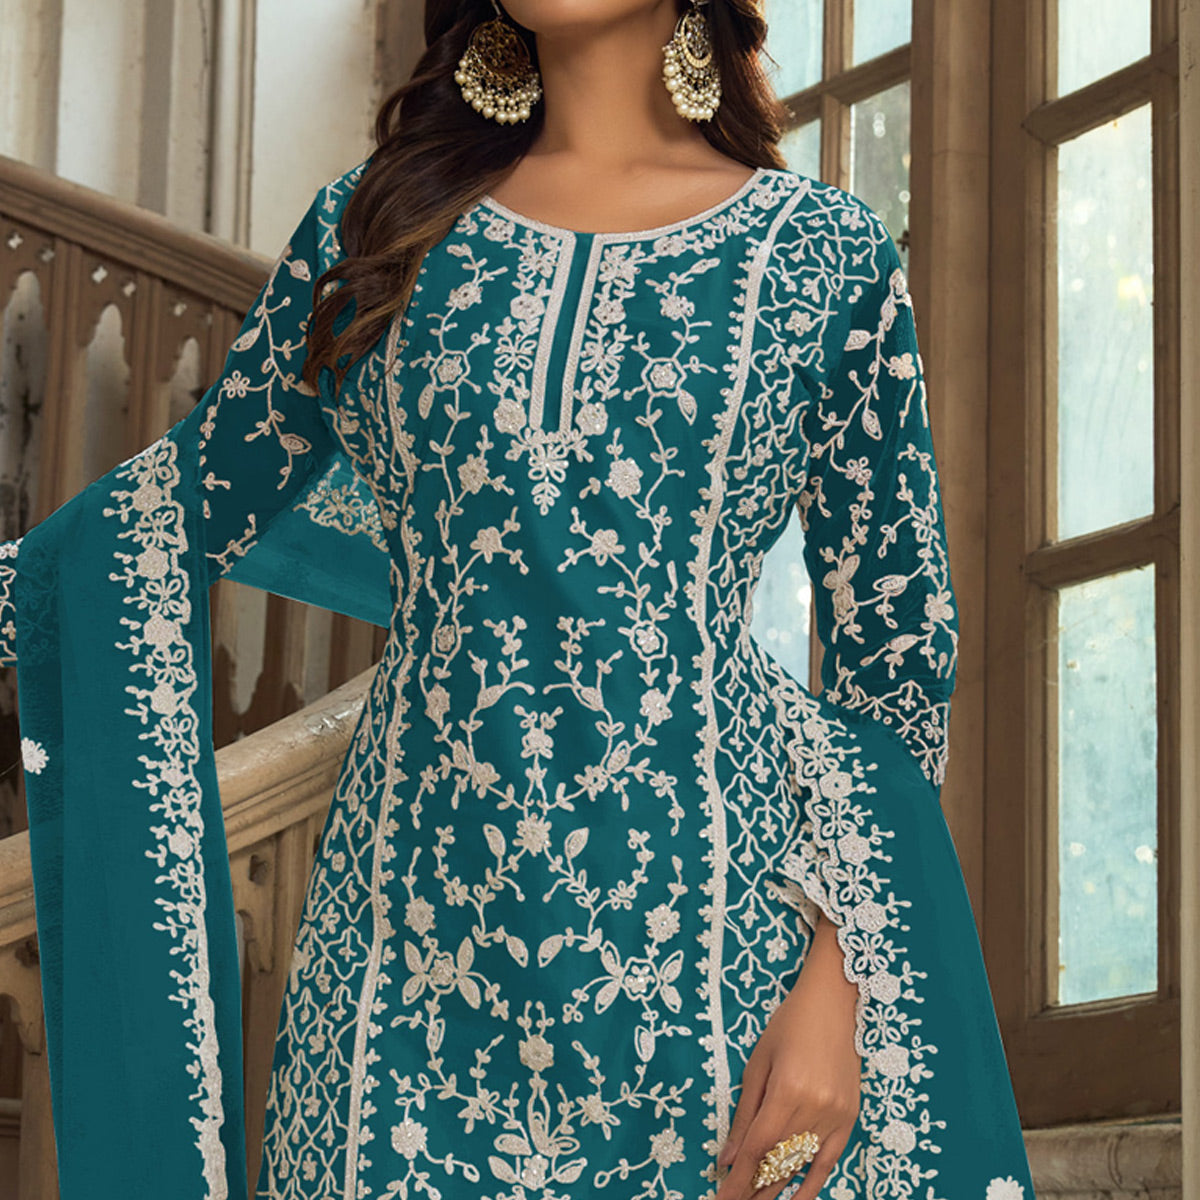 Morpich Floral Embroidered Net Semi Stitched Suit